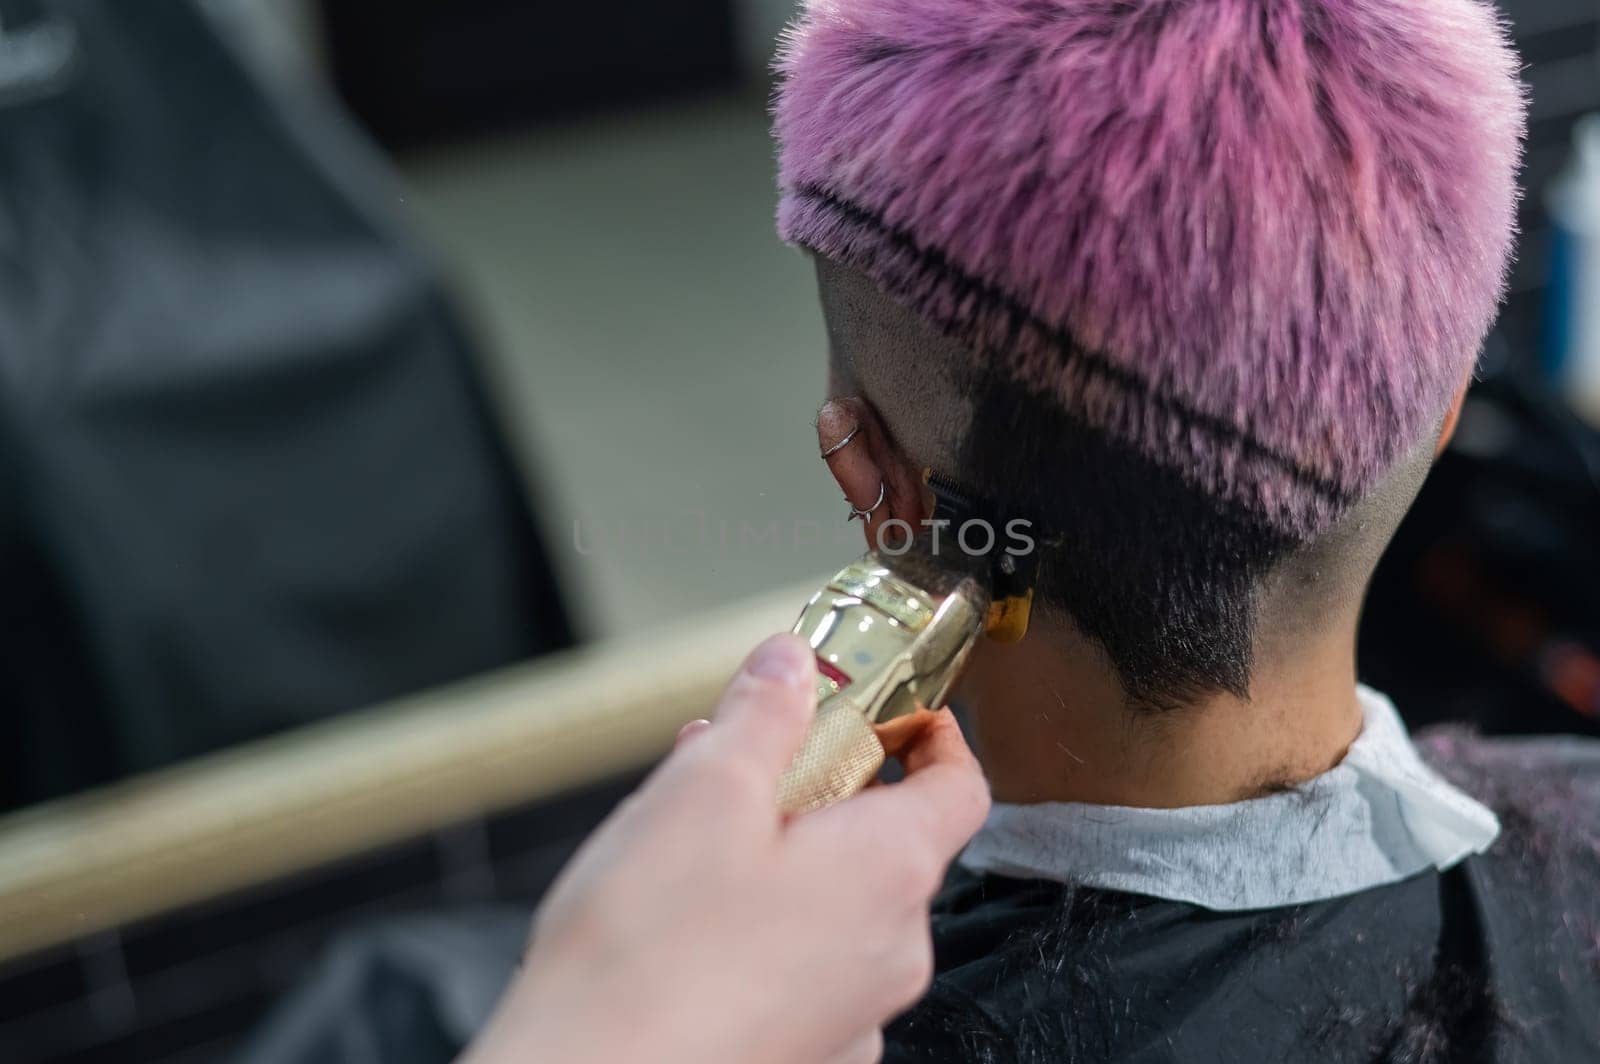 The hairdresser shaves the temple of a female client. Rear view of a woman with short pink hair in a barbershop. by mrwed54